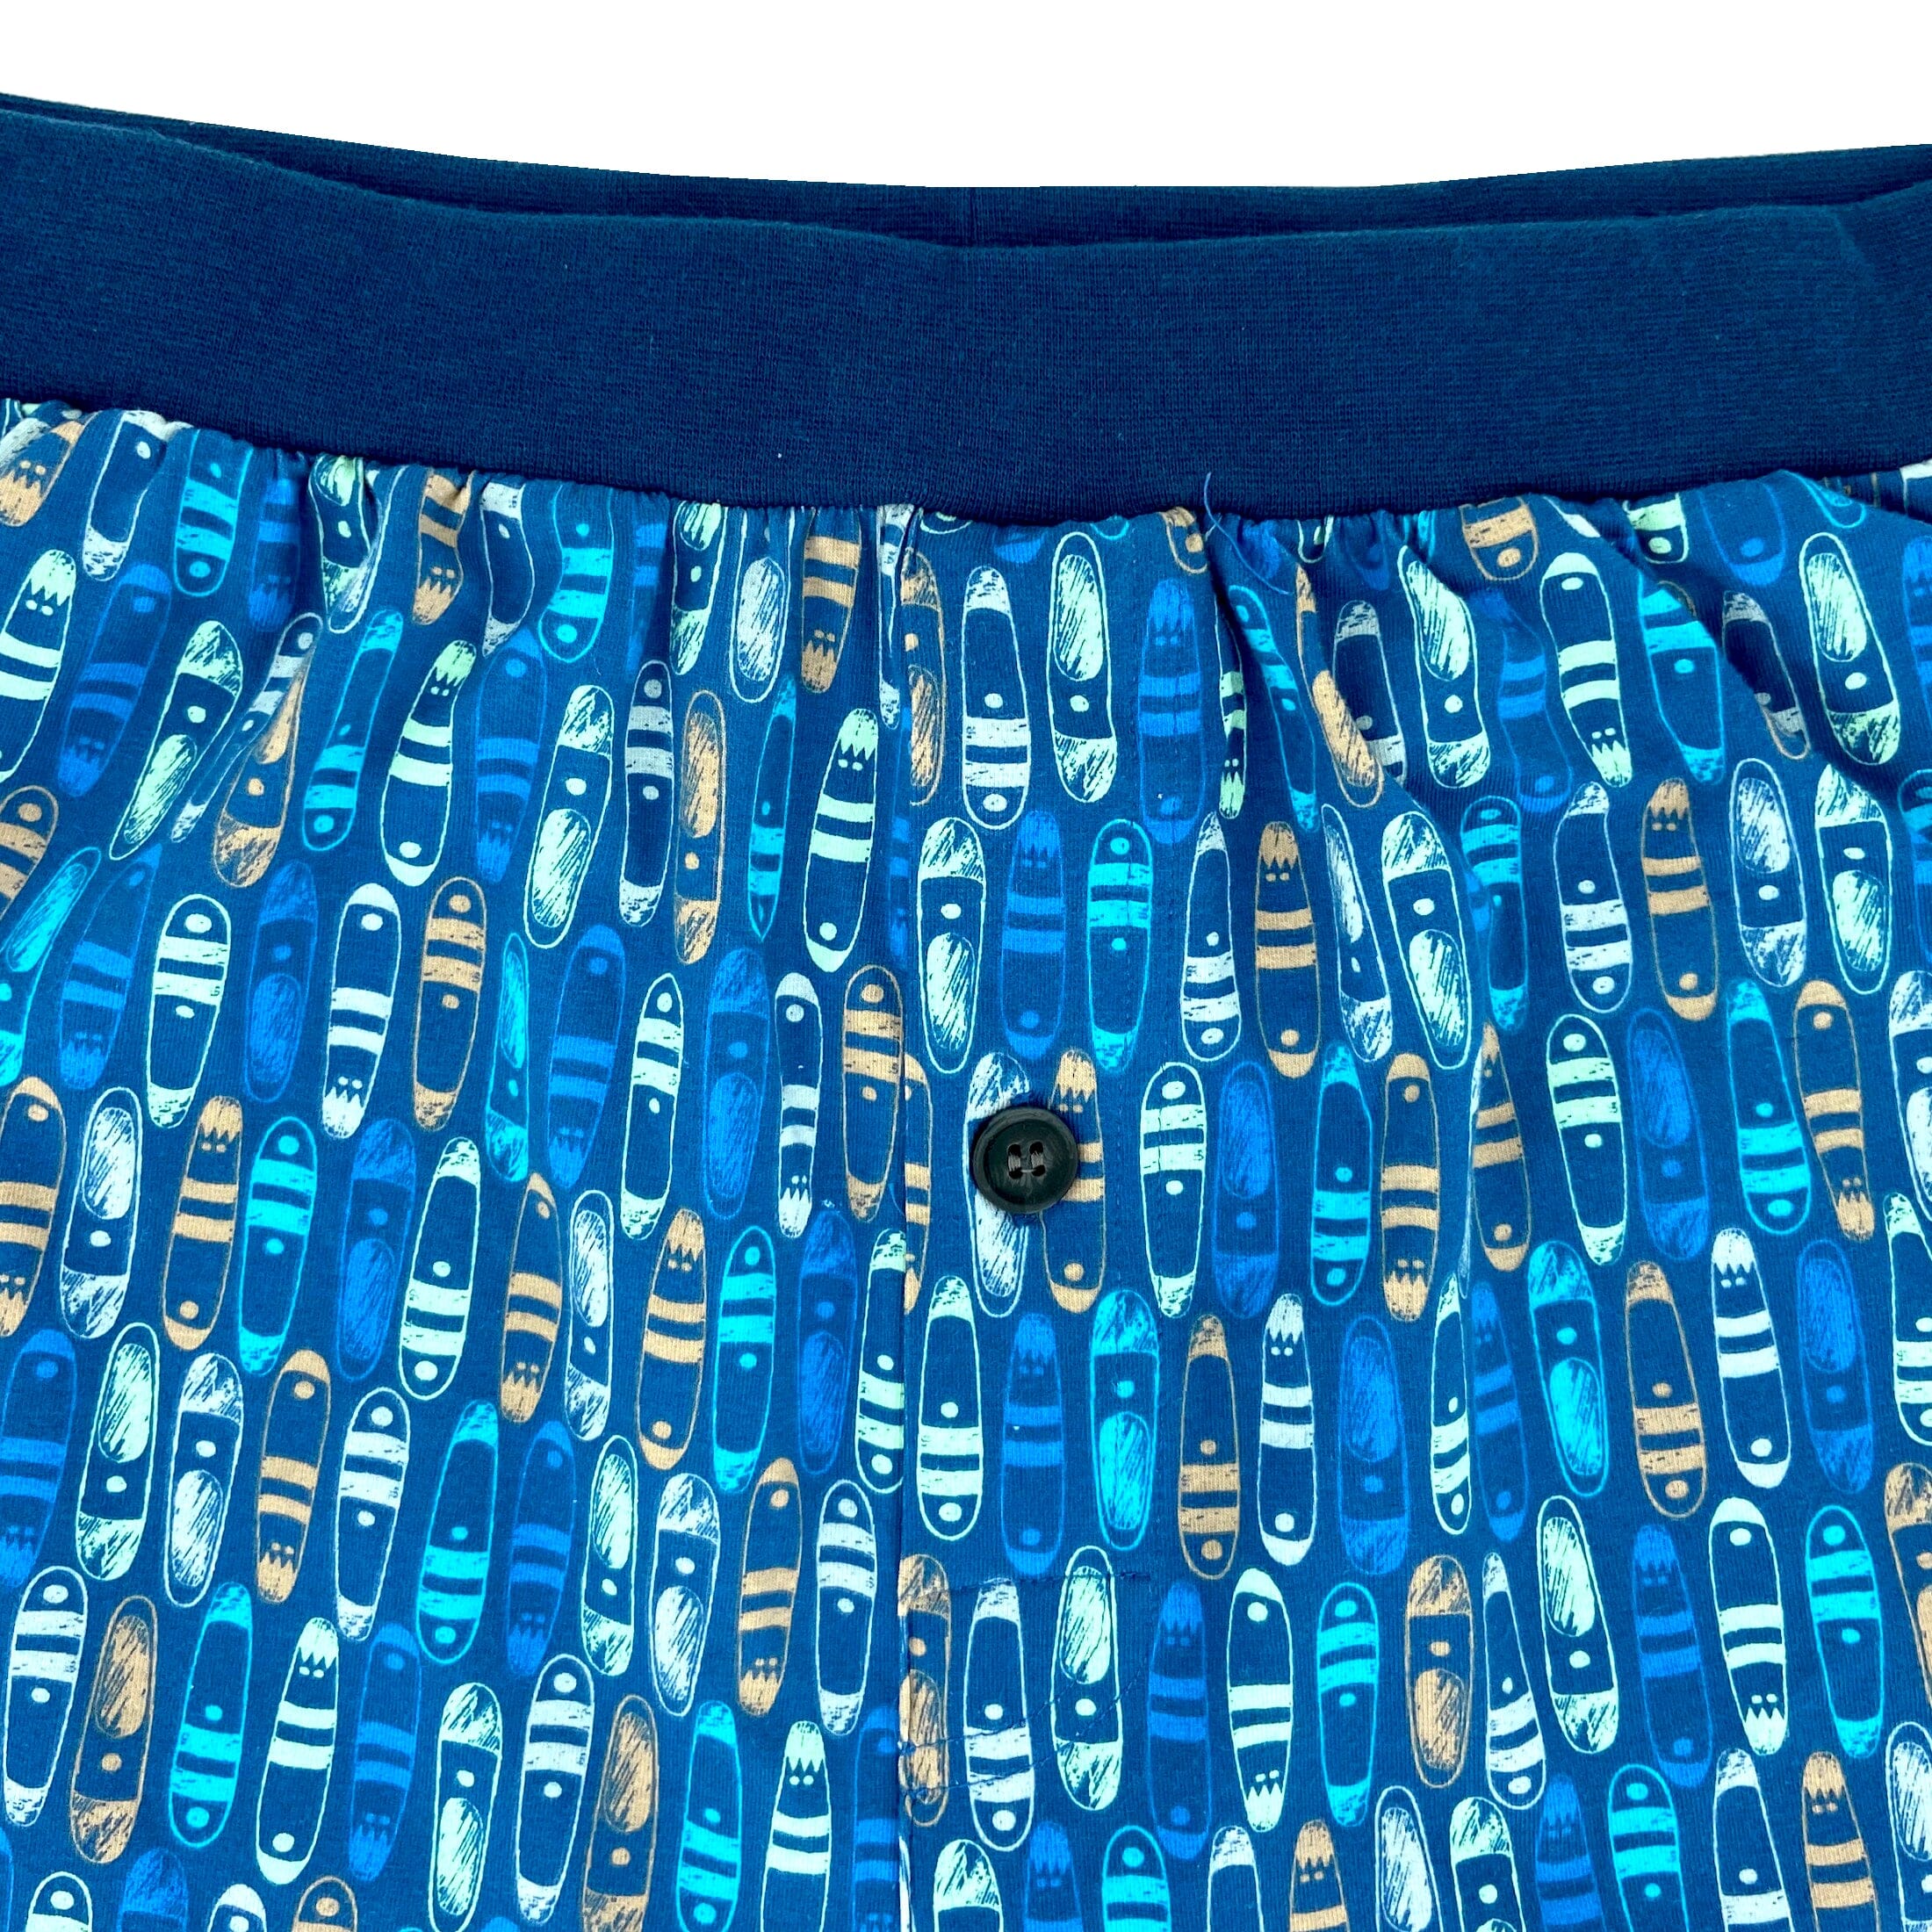 Comfy Loungewear Surfboard All Over Print Cotton Pajama Shorts for Men